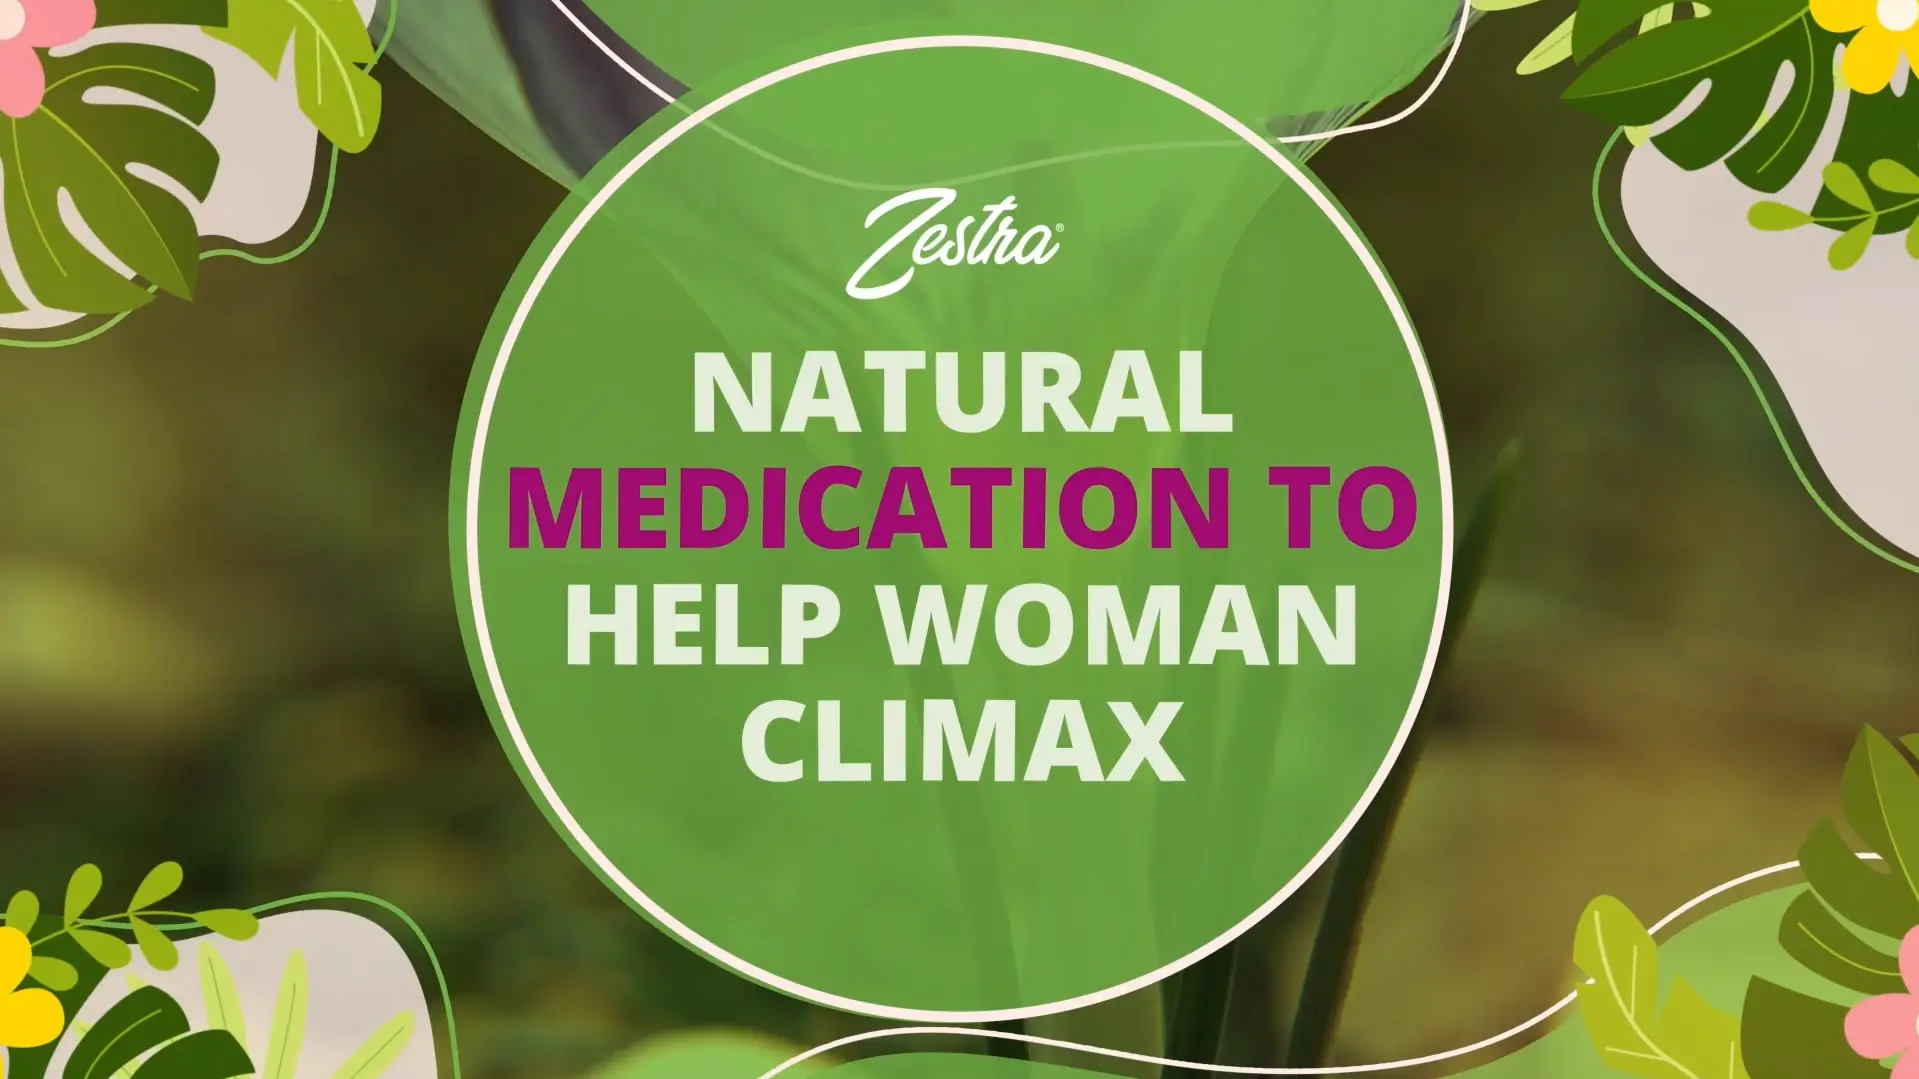 Natural Medication to help woman climax